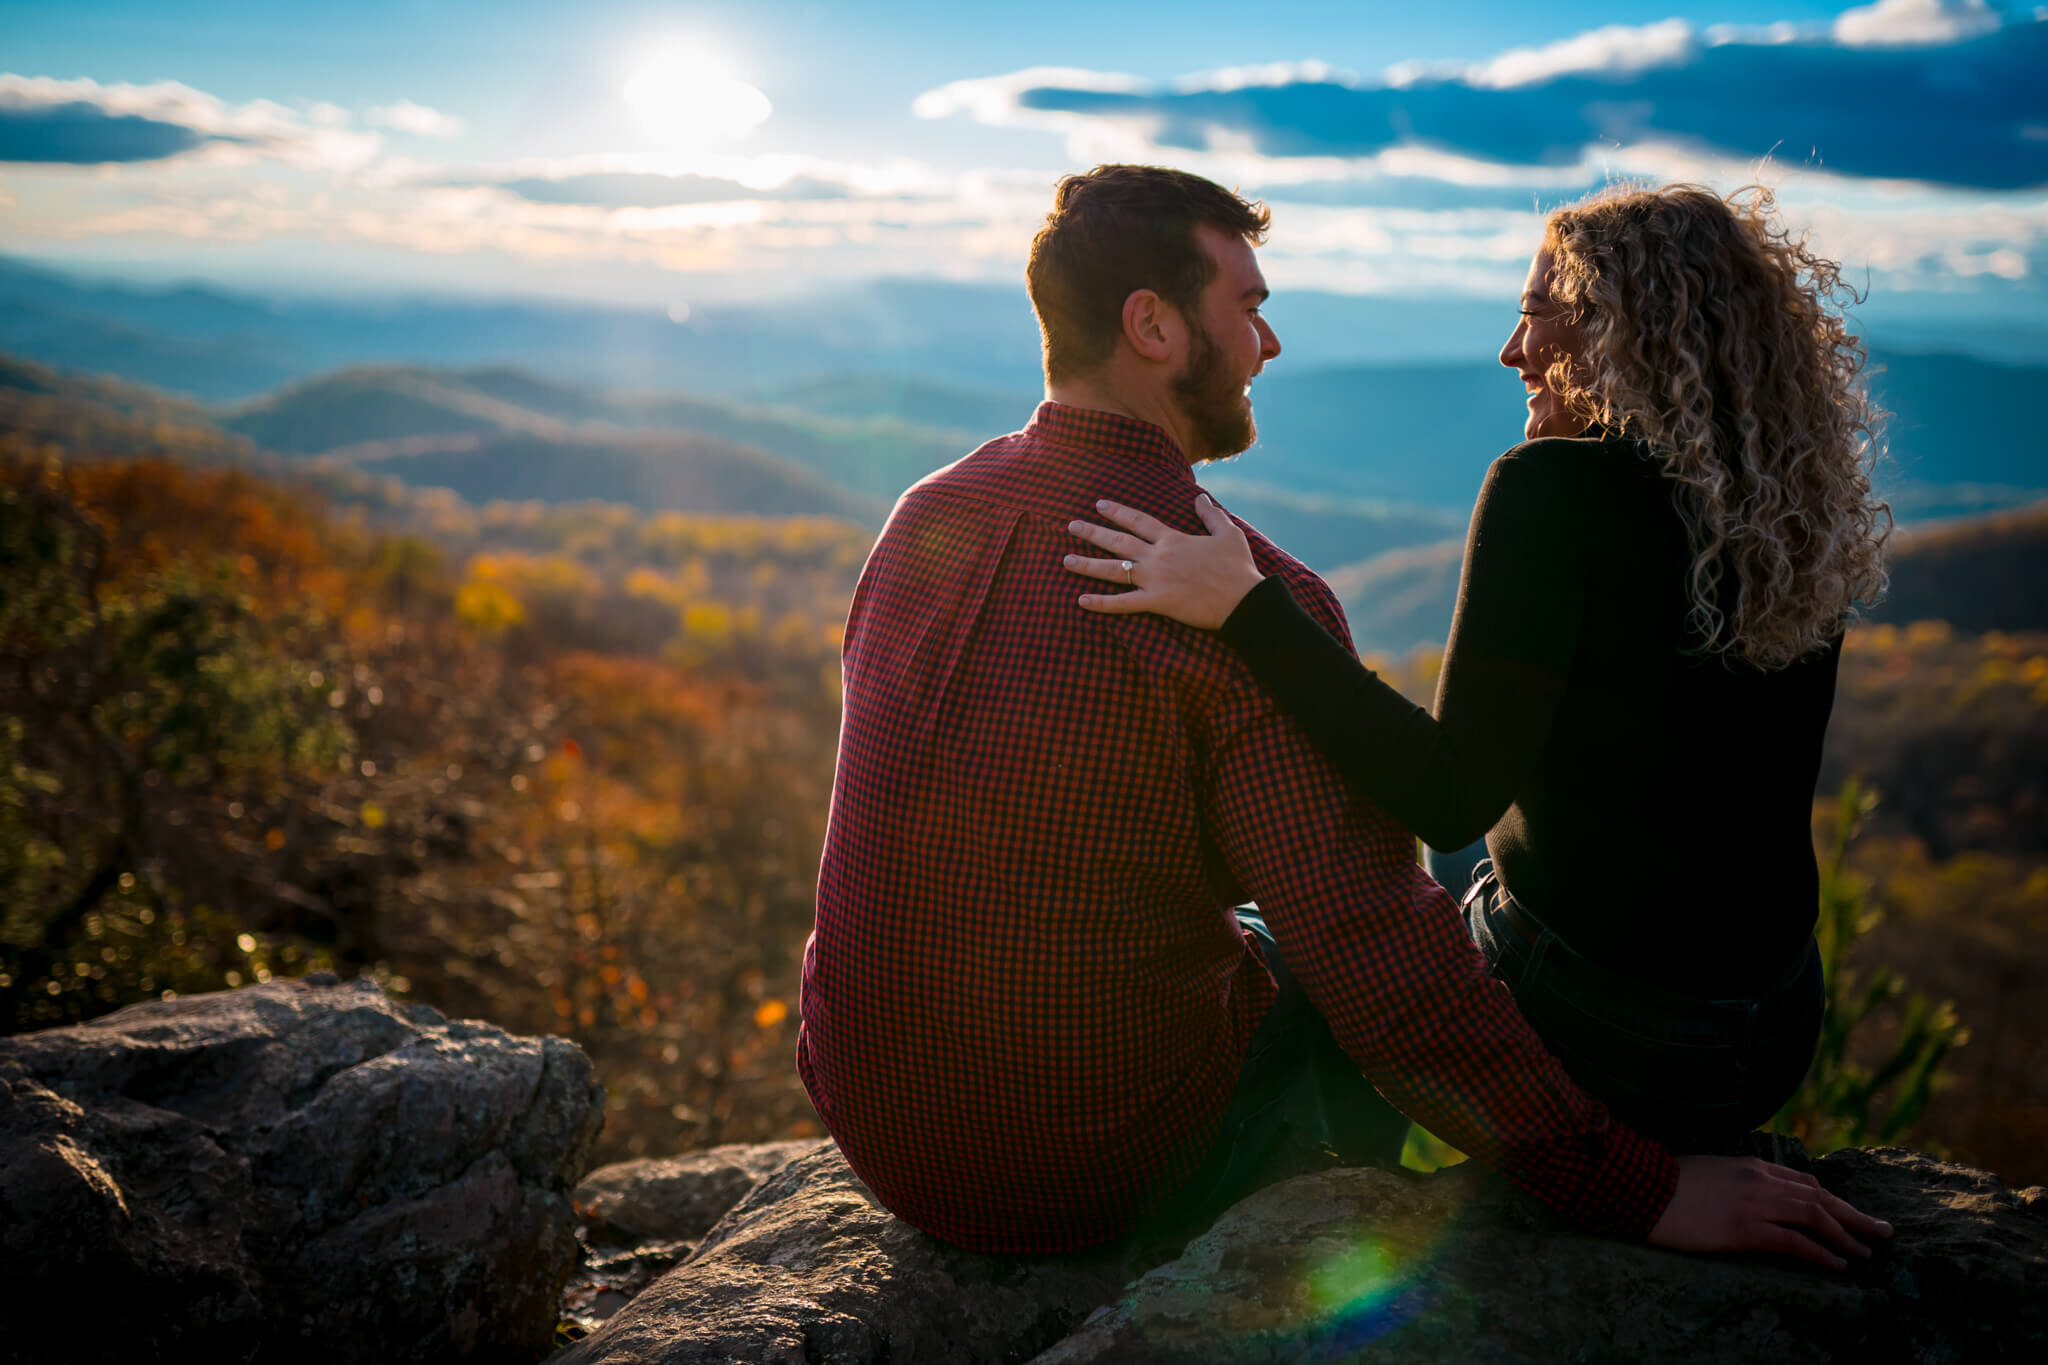 Surprise-Proposal-The-Point-Overlook-Shenandoah-National-Park-Photography-by-Bee-Two-Sweet-116.jpg